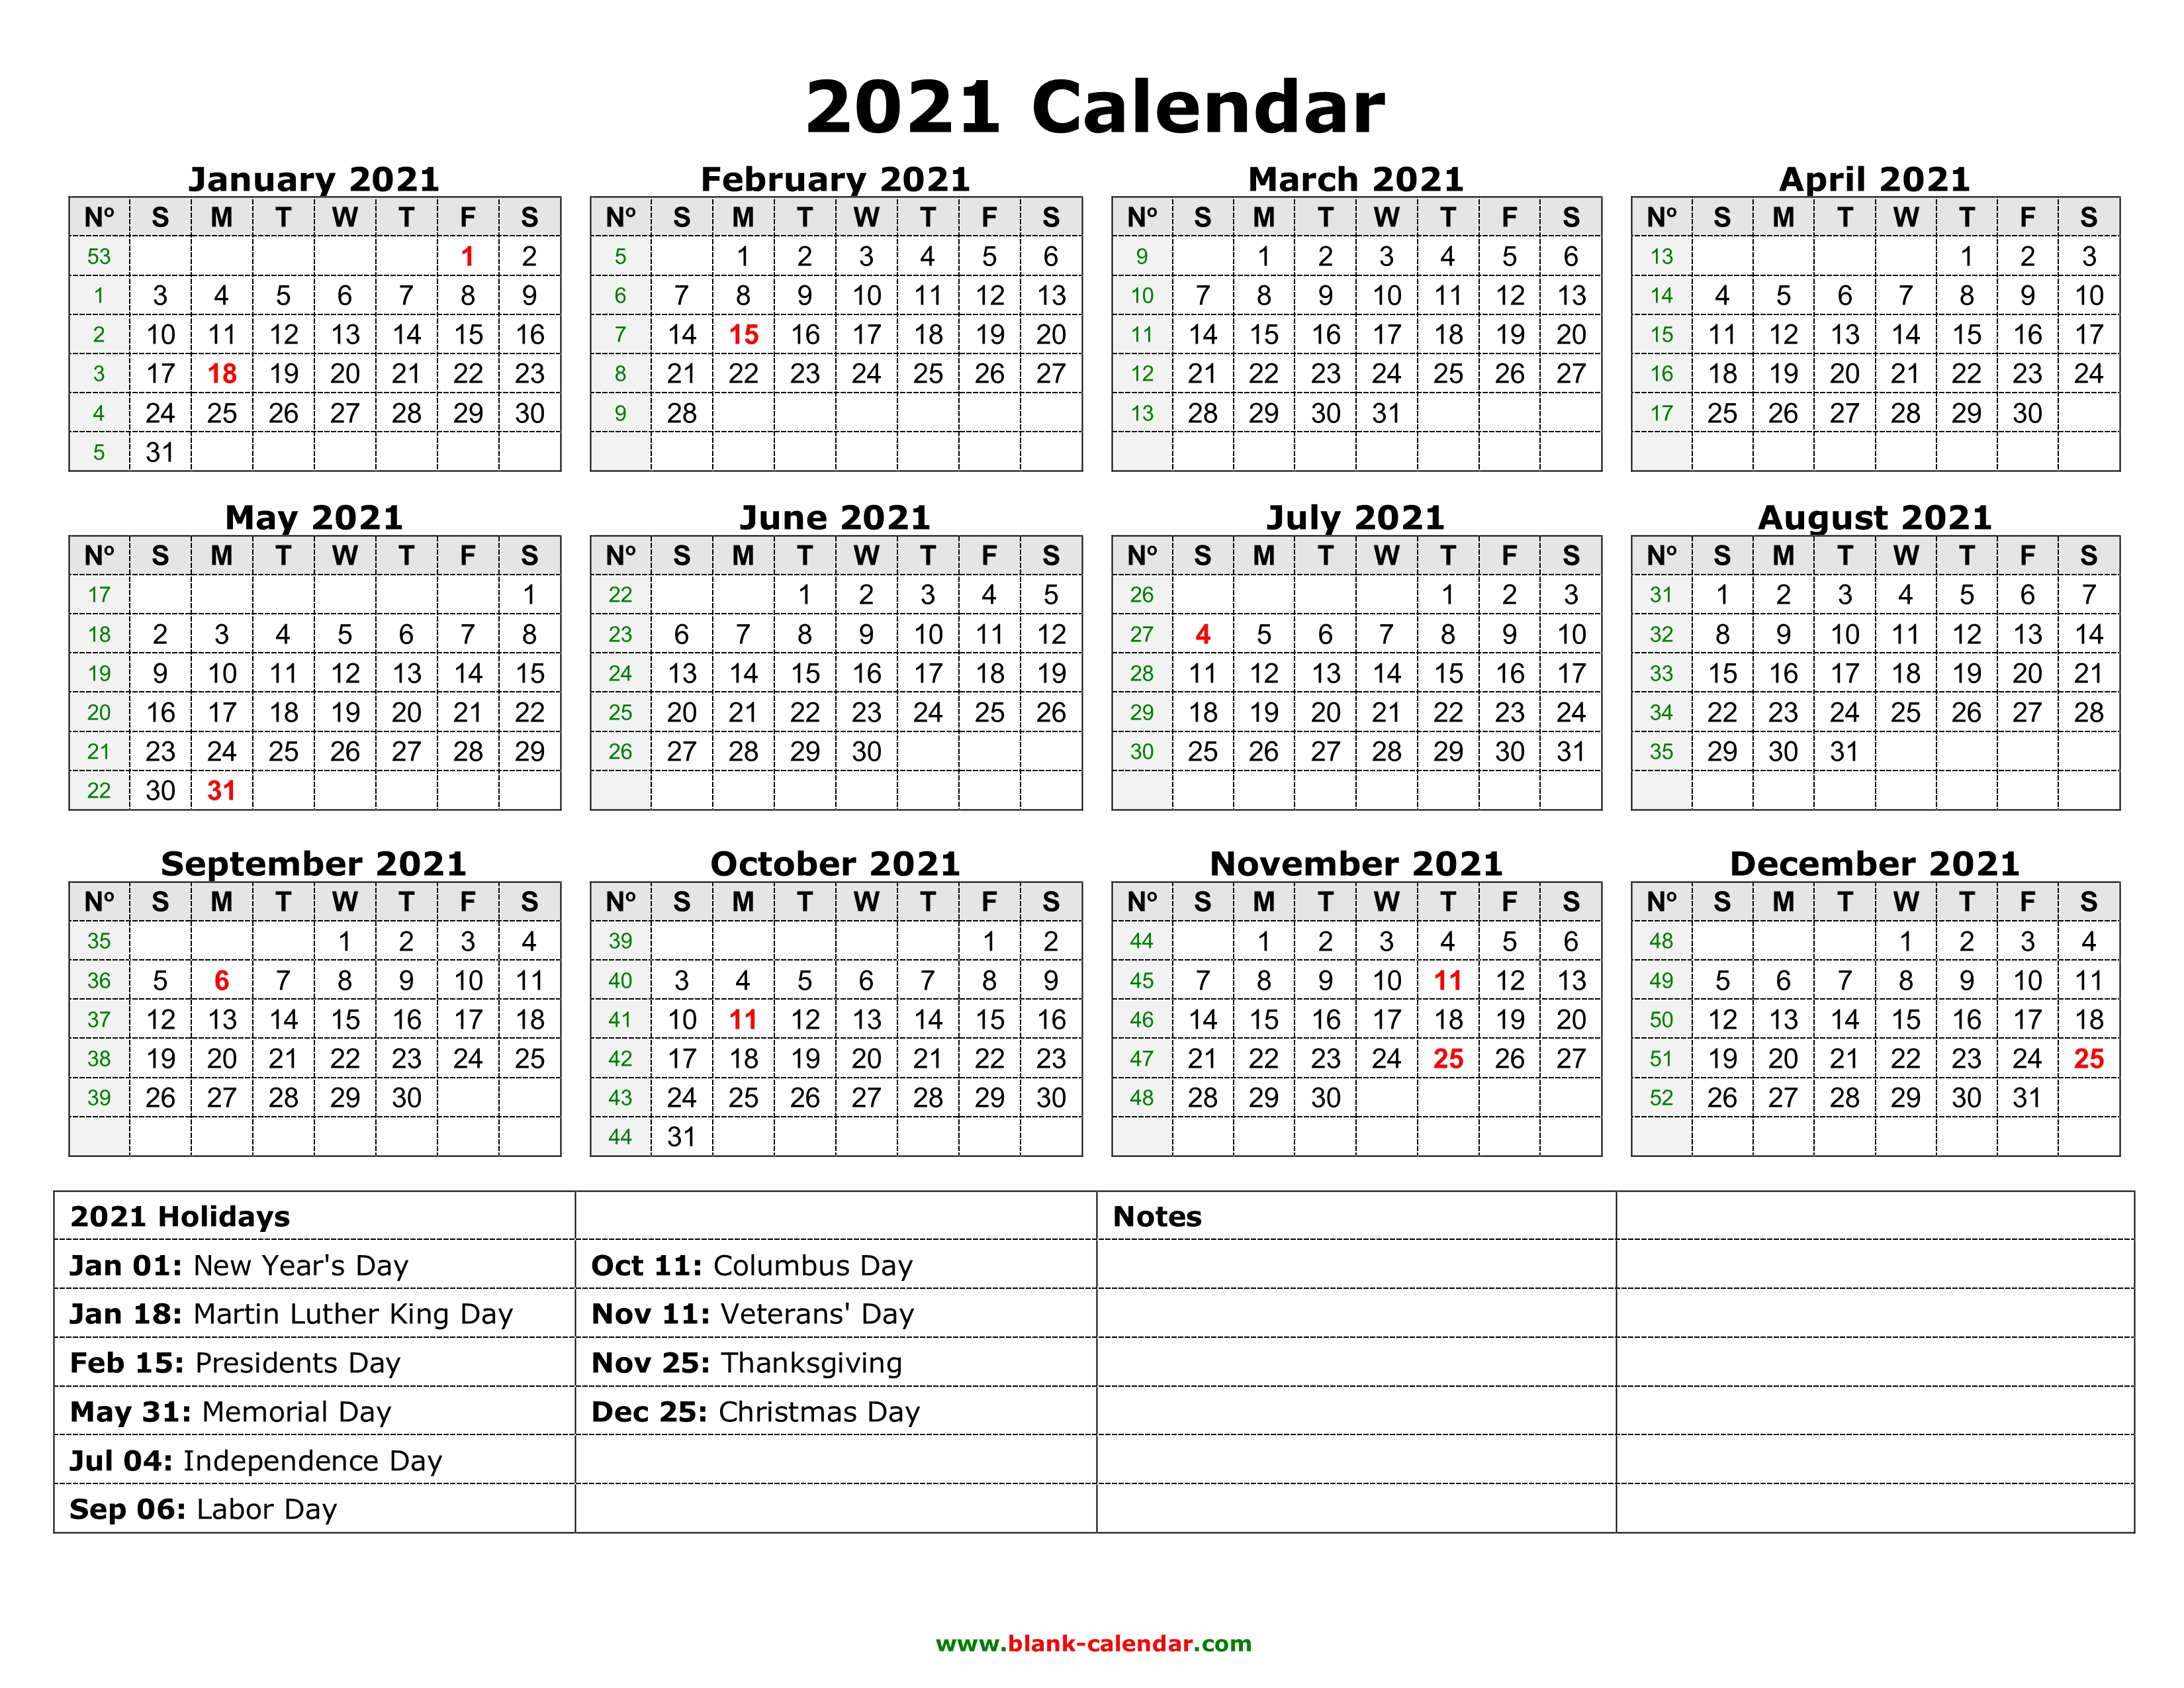 Free 2021 Yearly Calender Template : 2021 year calendar ...